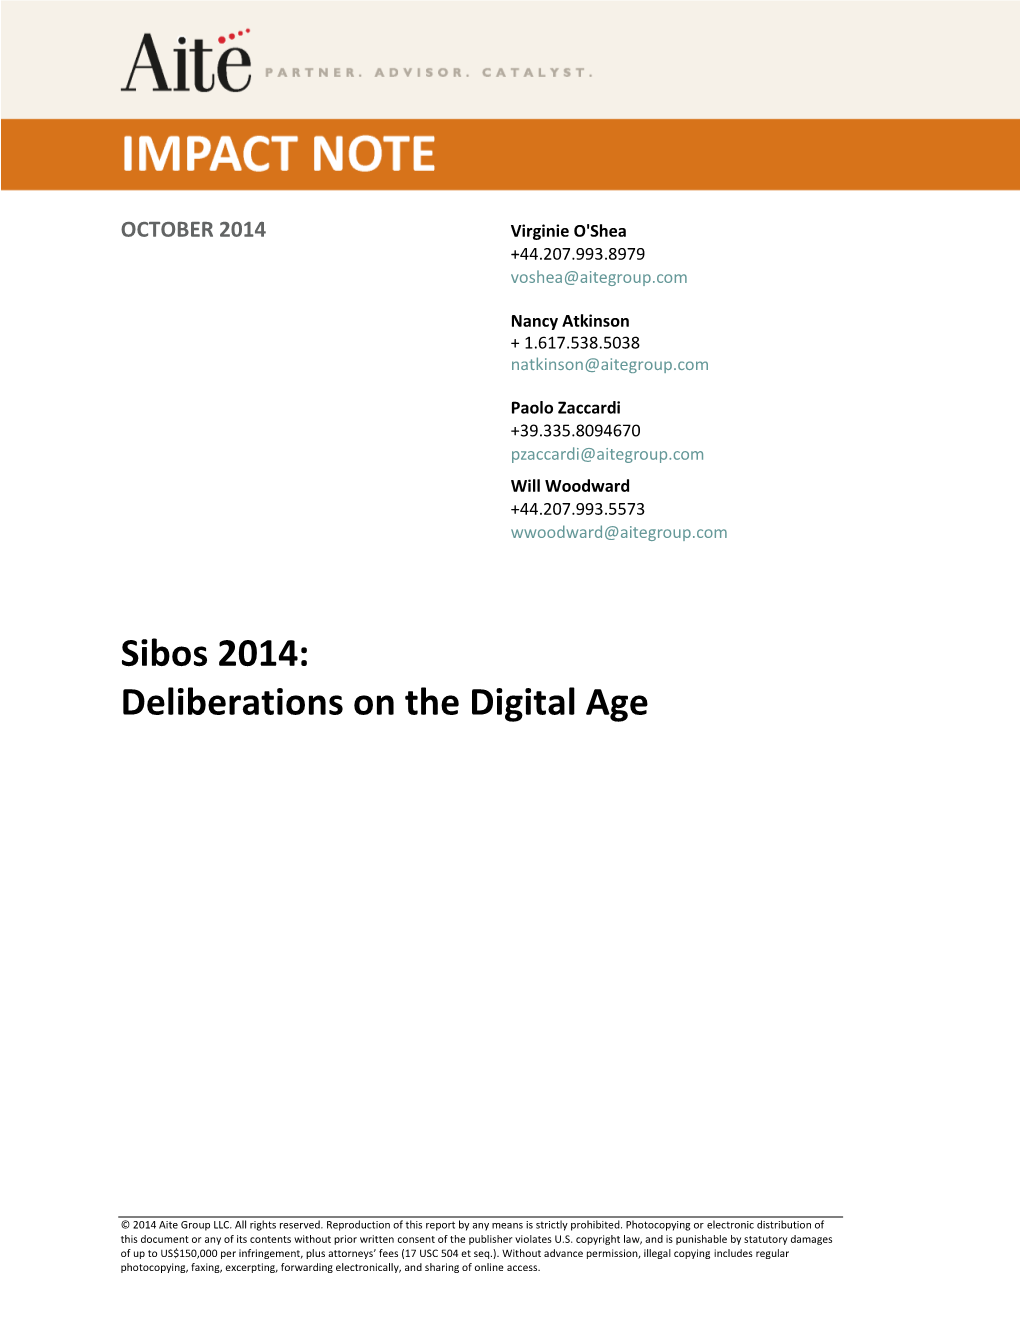 Sibos 2014: Deliberations on the Digital Age